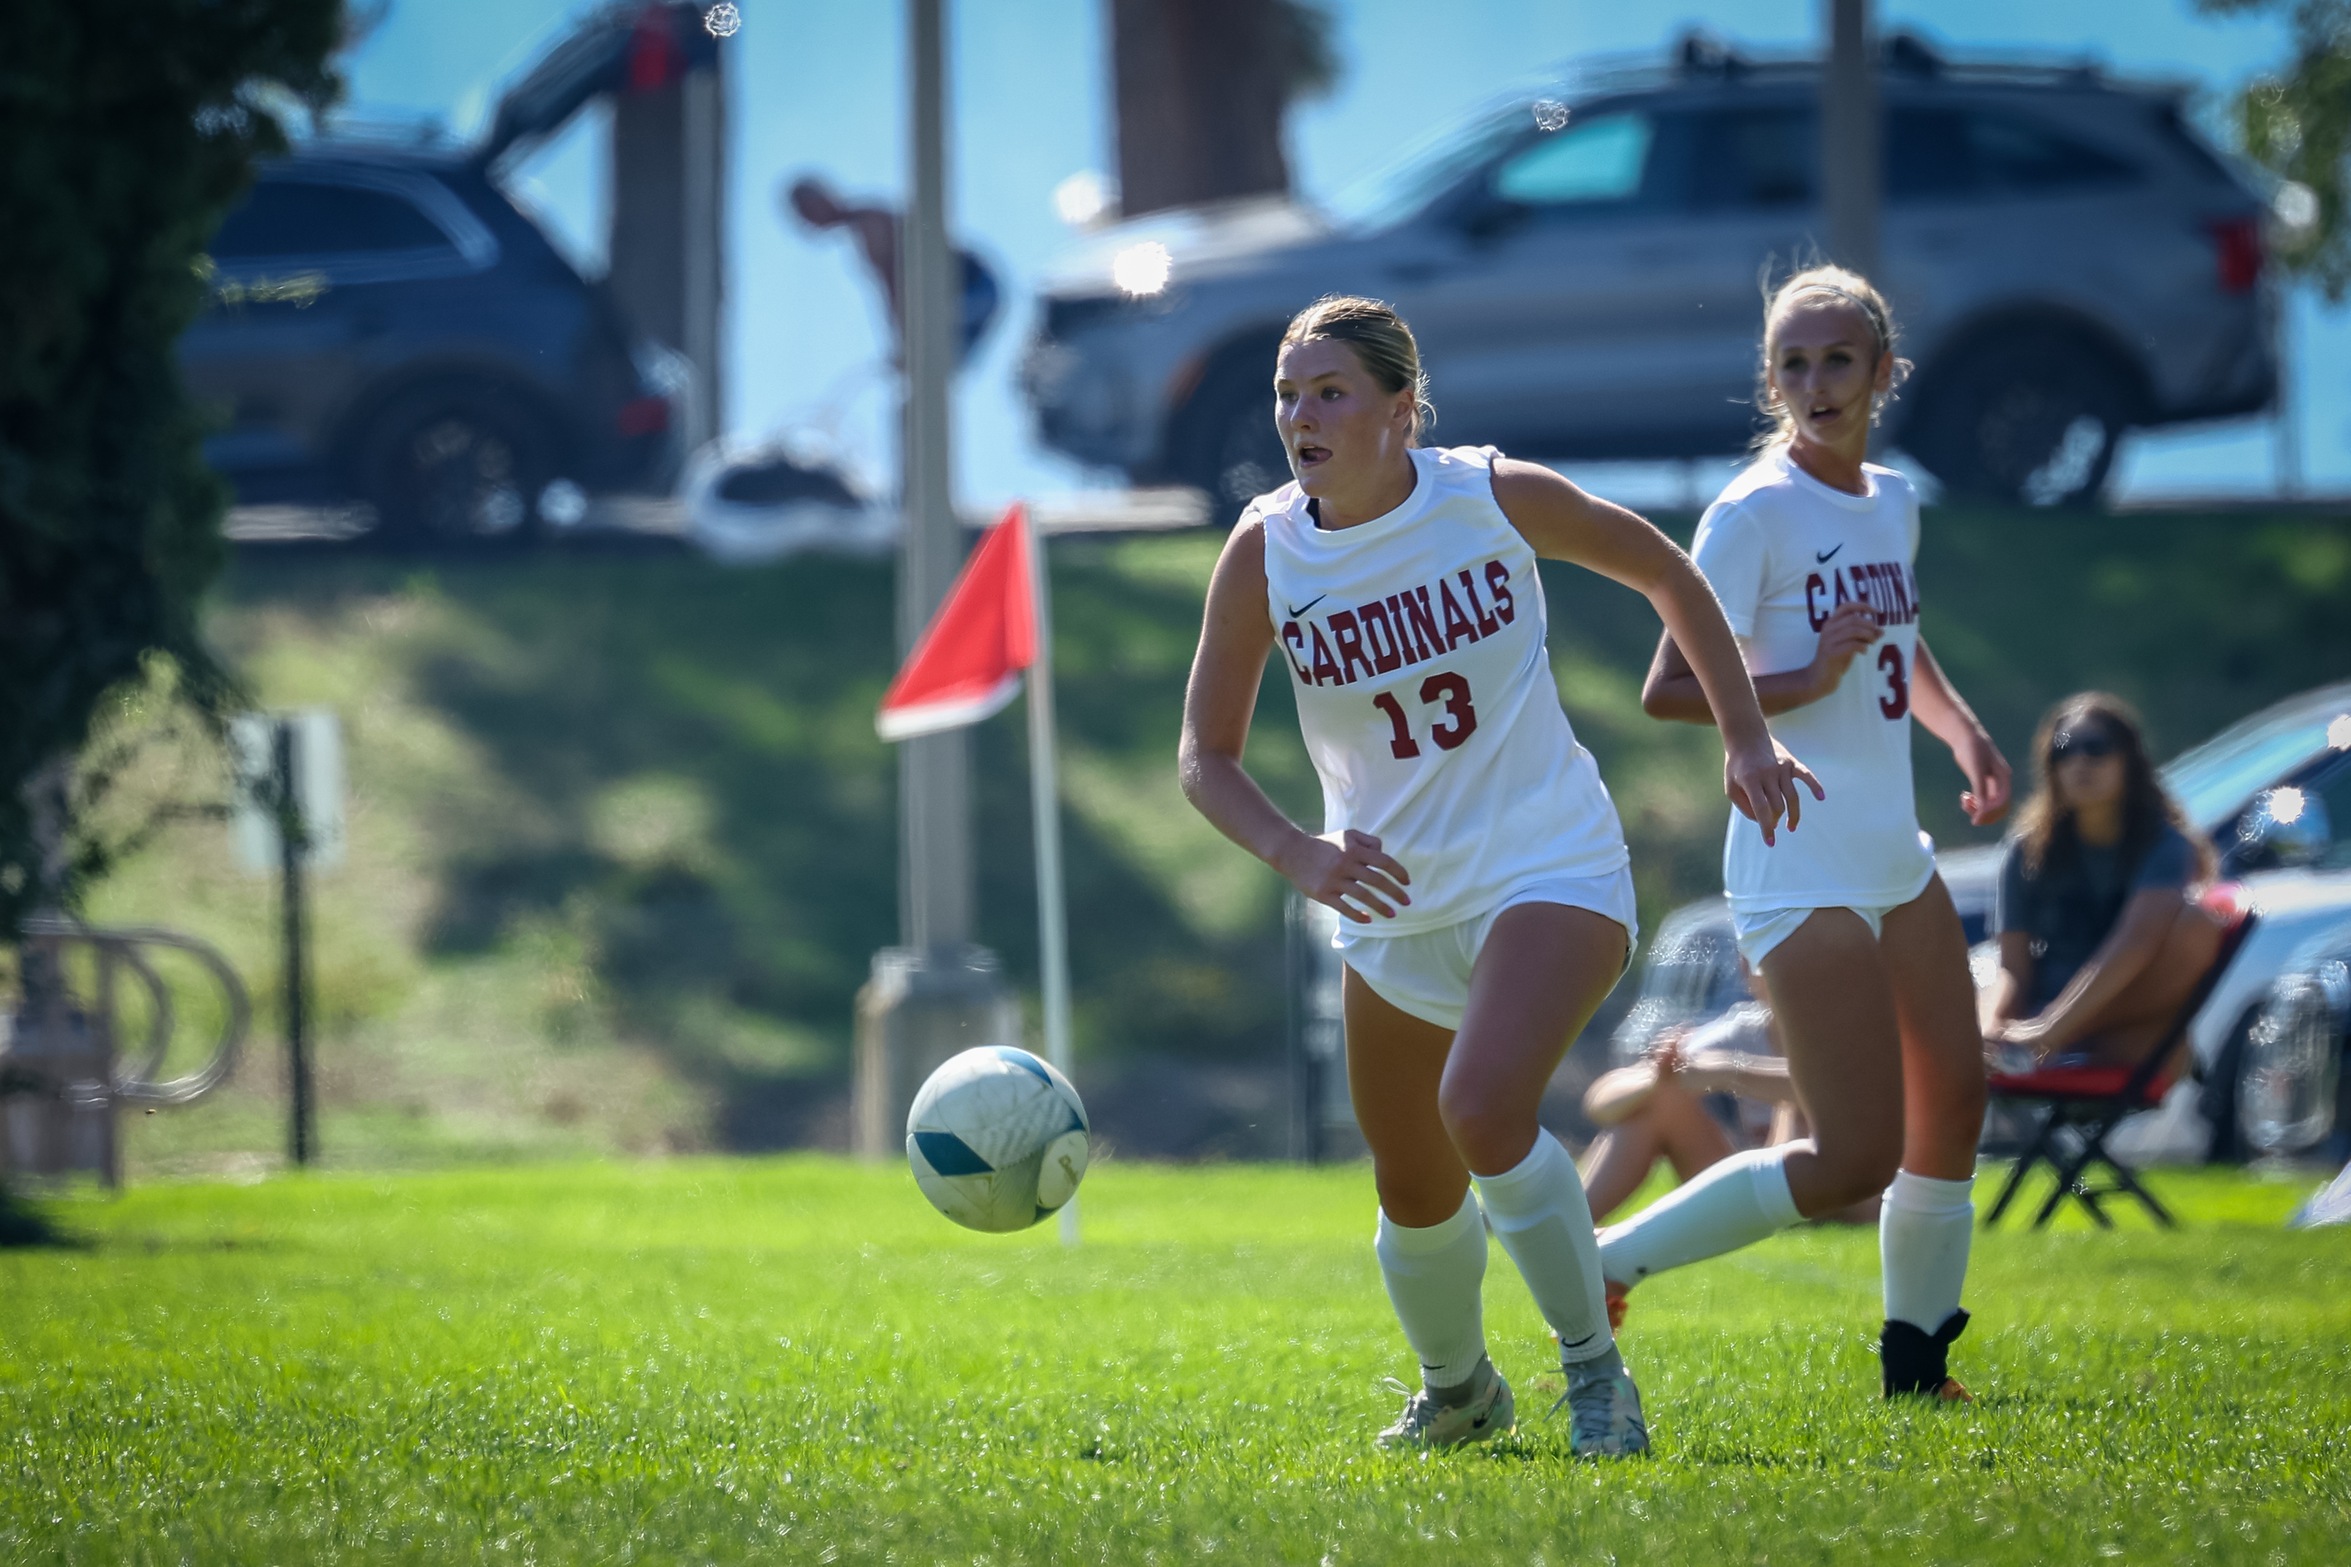 NIC women's soccer player Adison Stoddard brings ball up the field